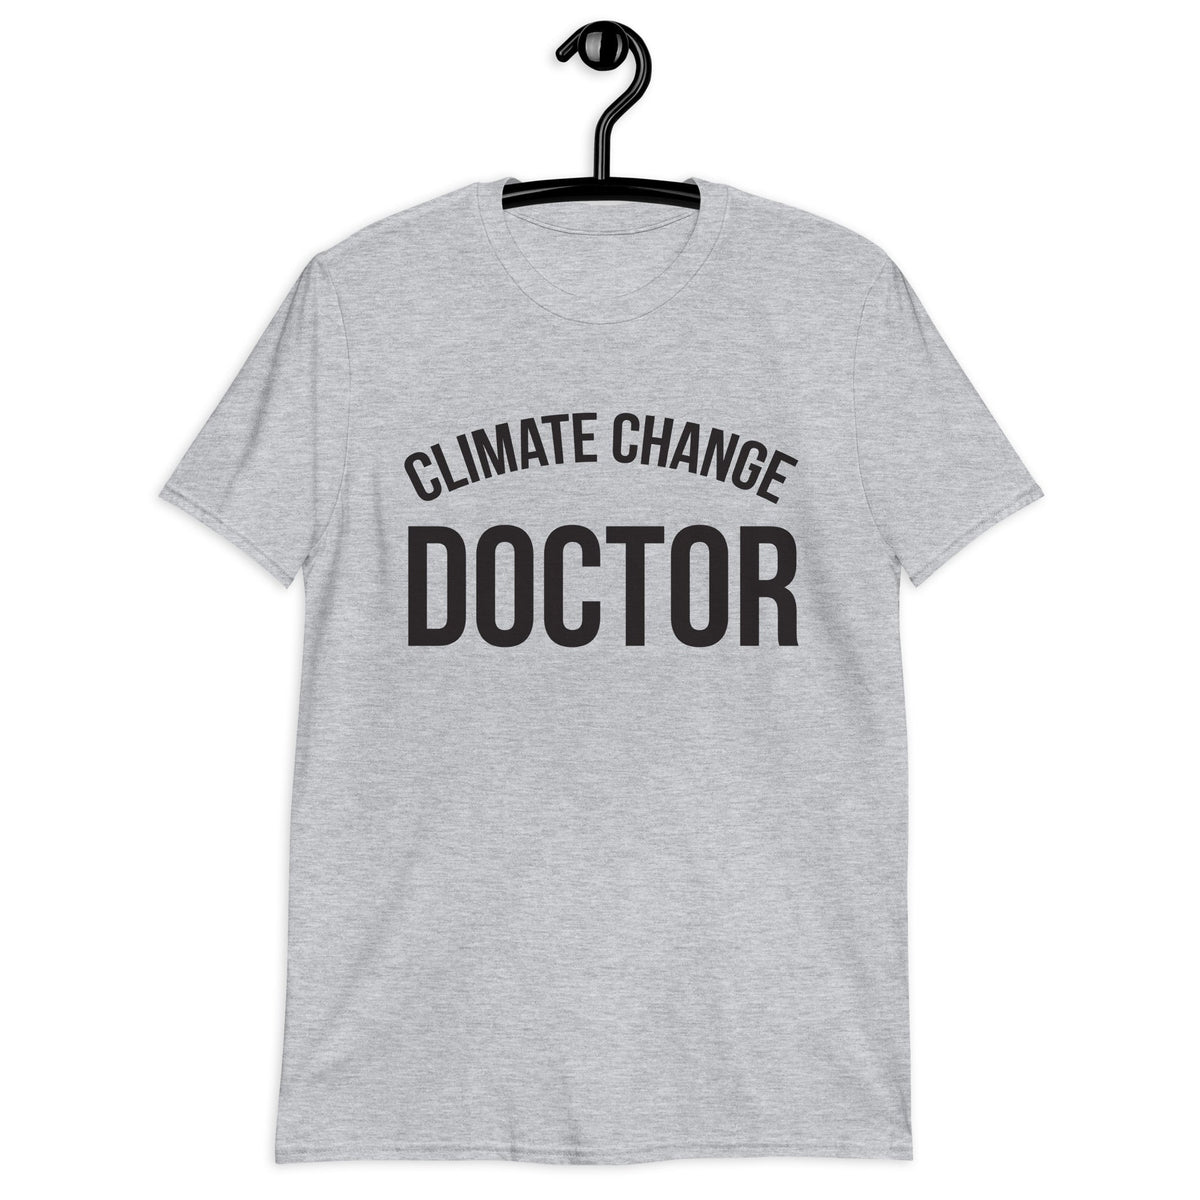 CLIMATE CHANGE DOCTOR short sleeve t-shirt